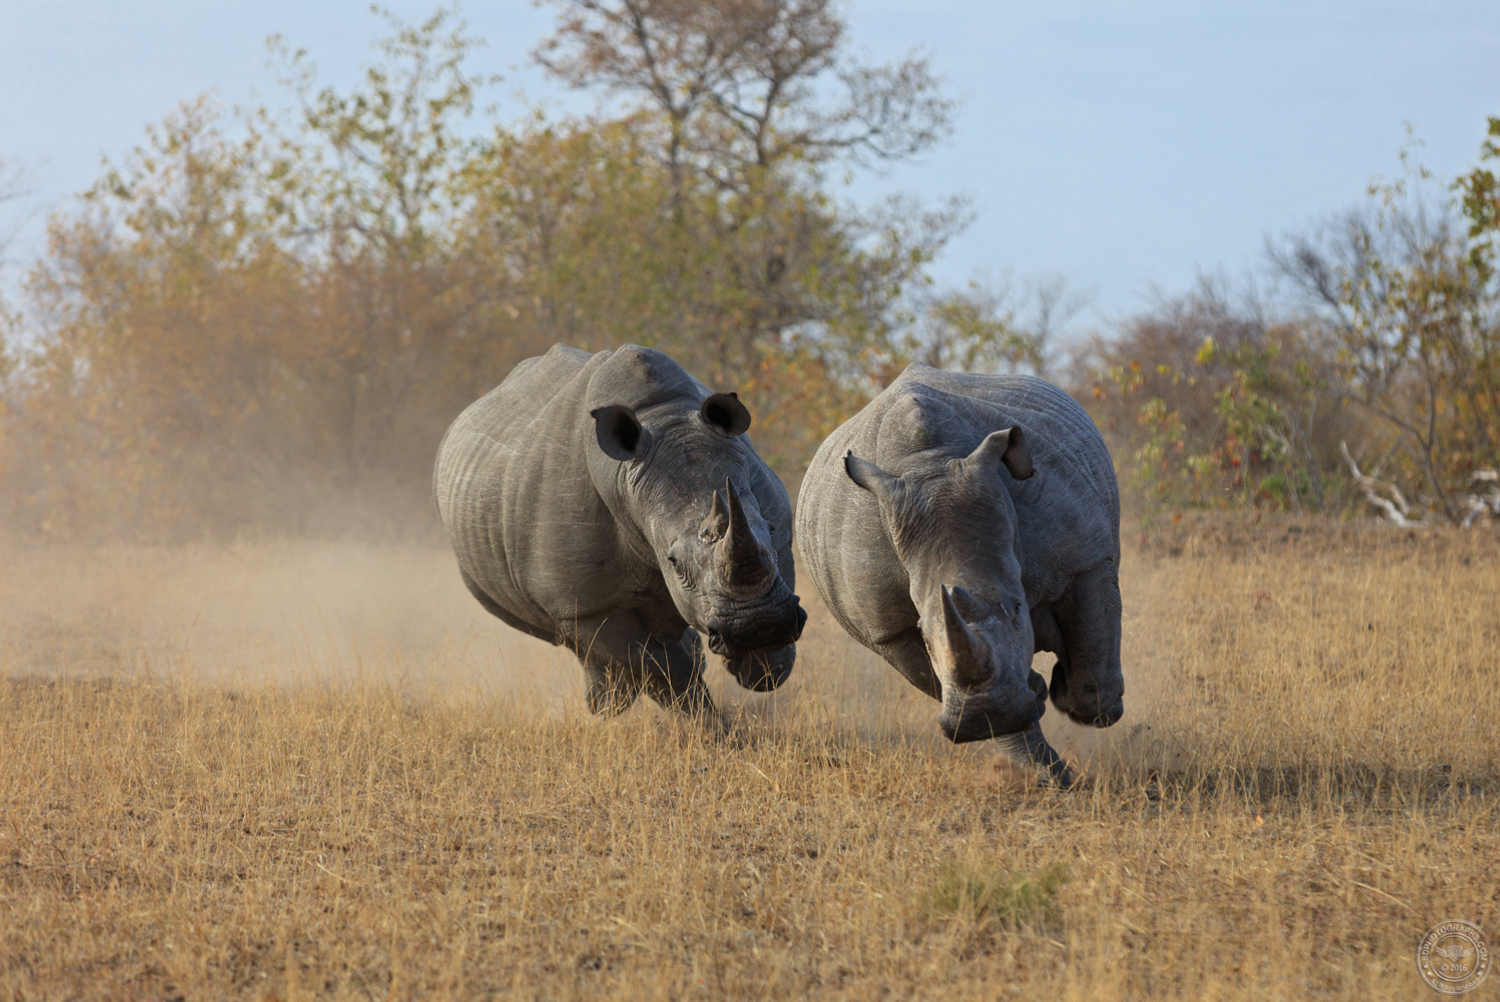 Two white rhinoceroses (Ceratotherium simum) running in the Sabi Sands Game Reserve, South Africa